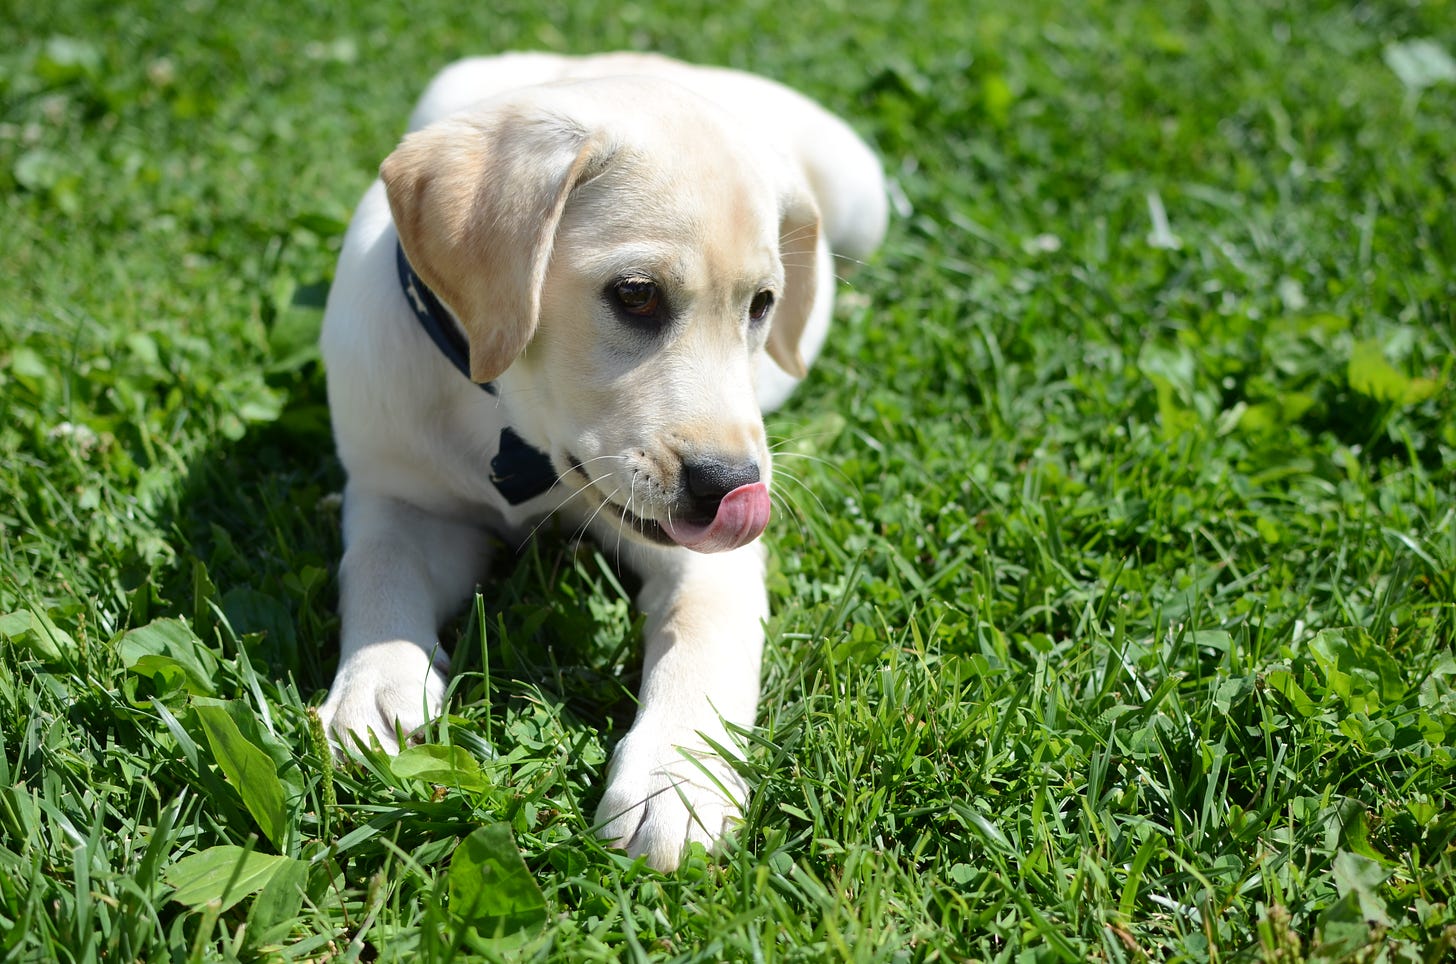 A yellow Labrador retriever licks her nose and lays in the grass.